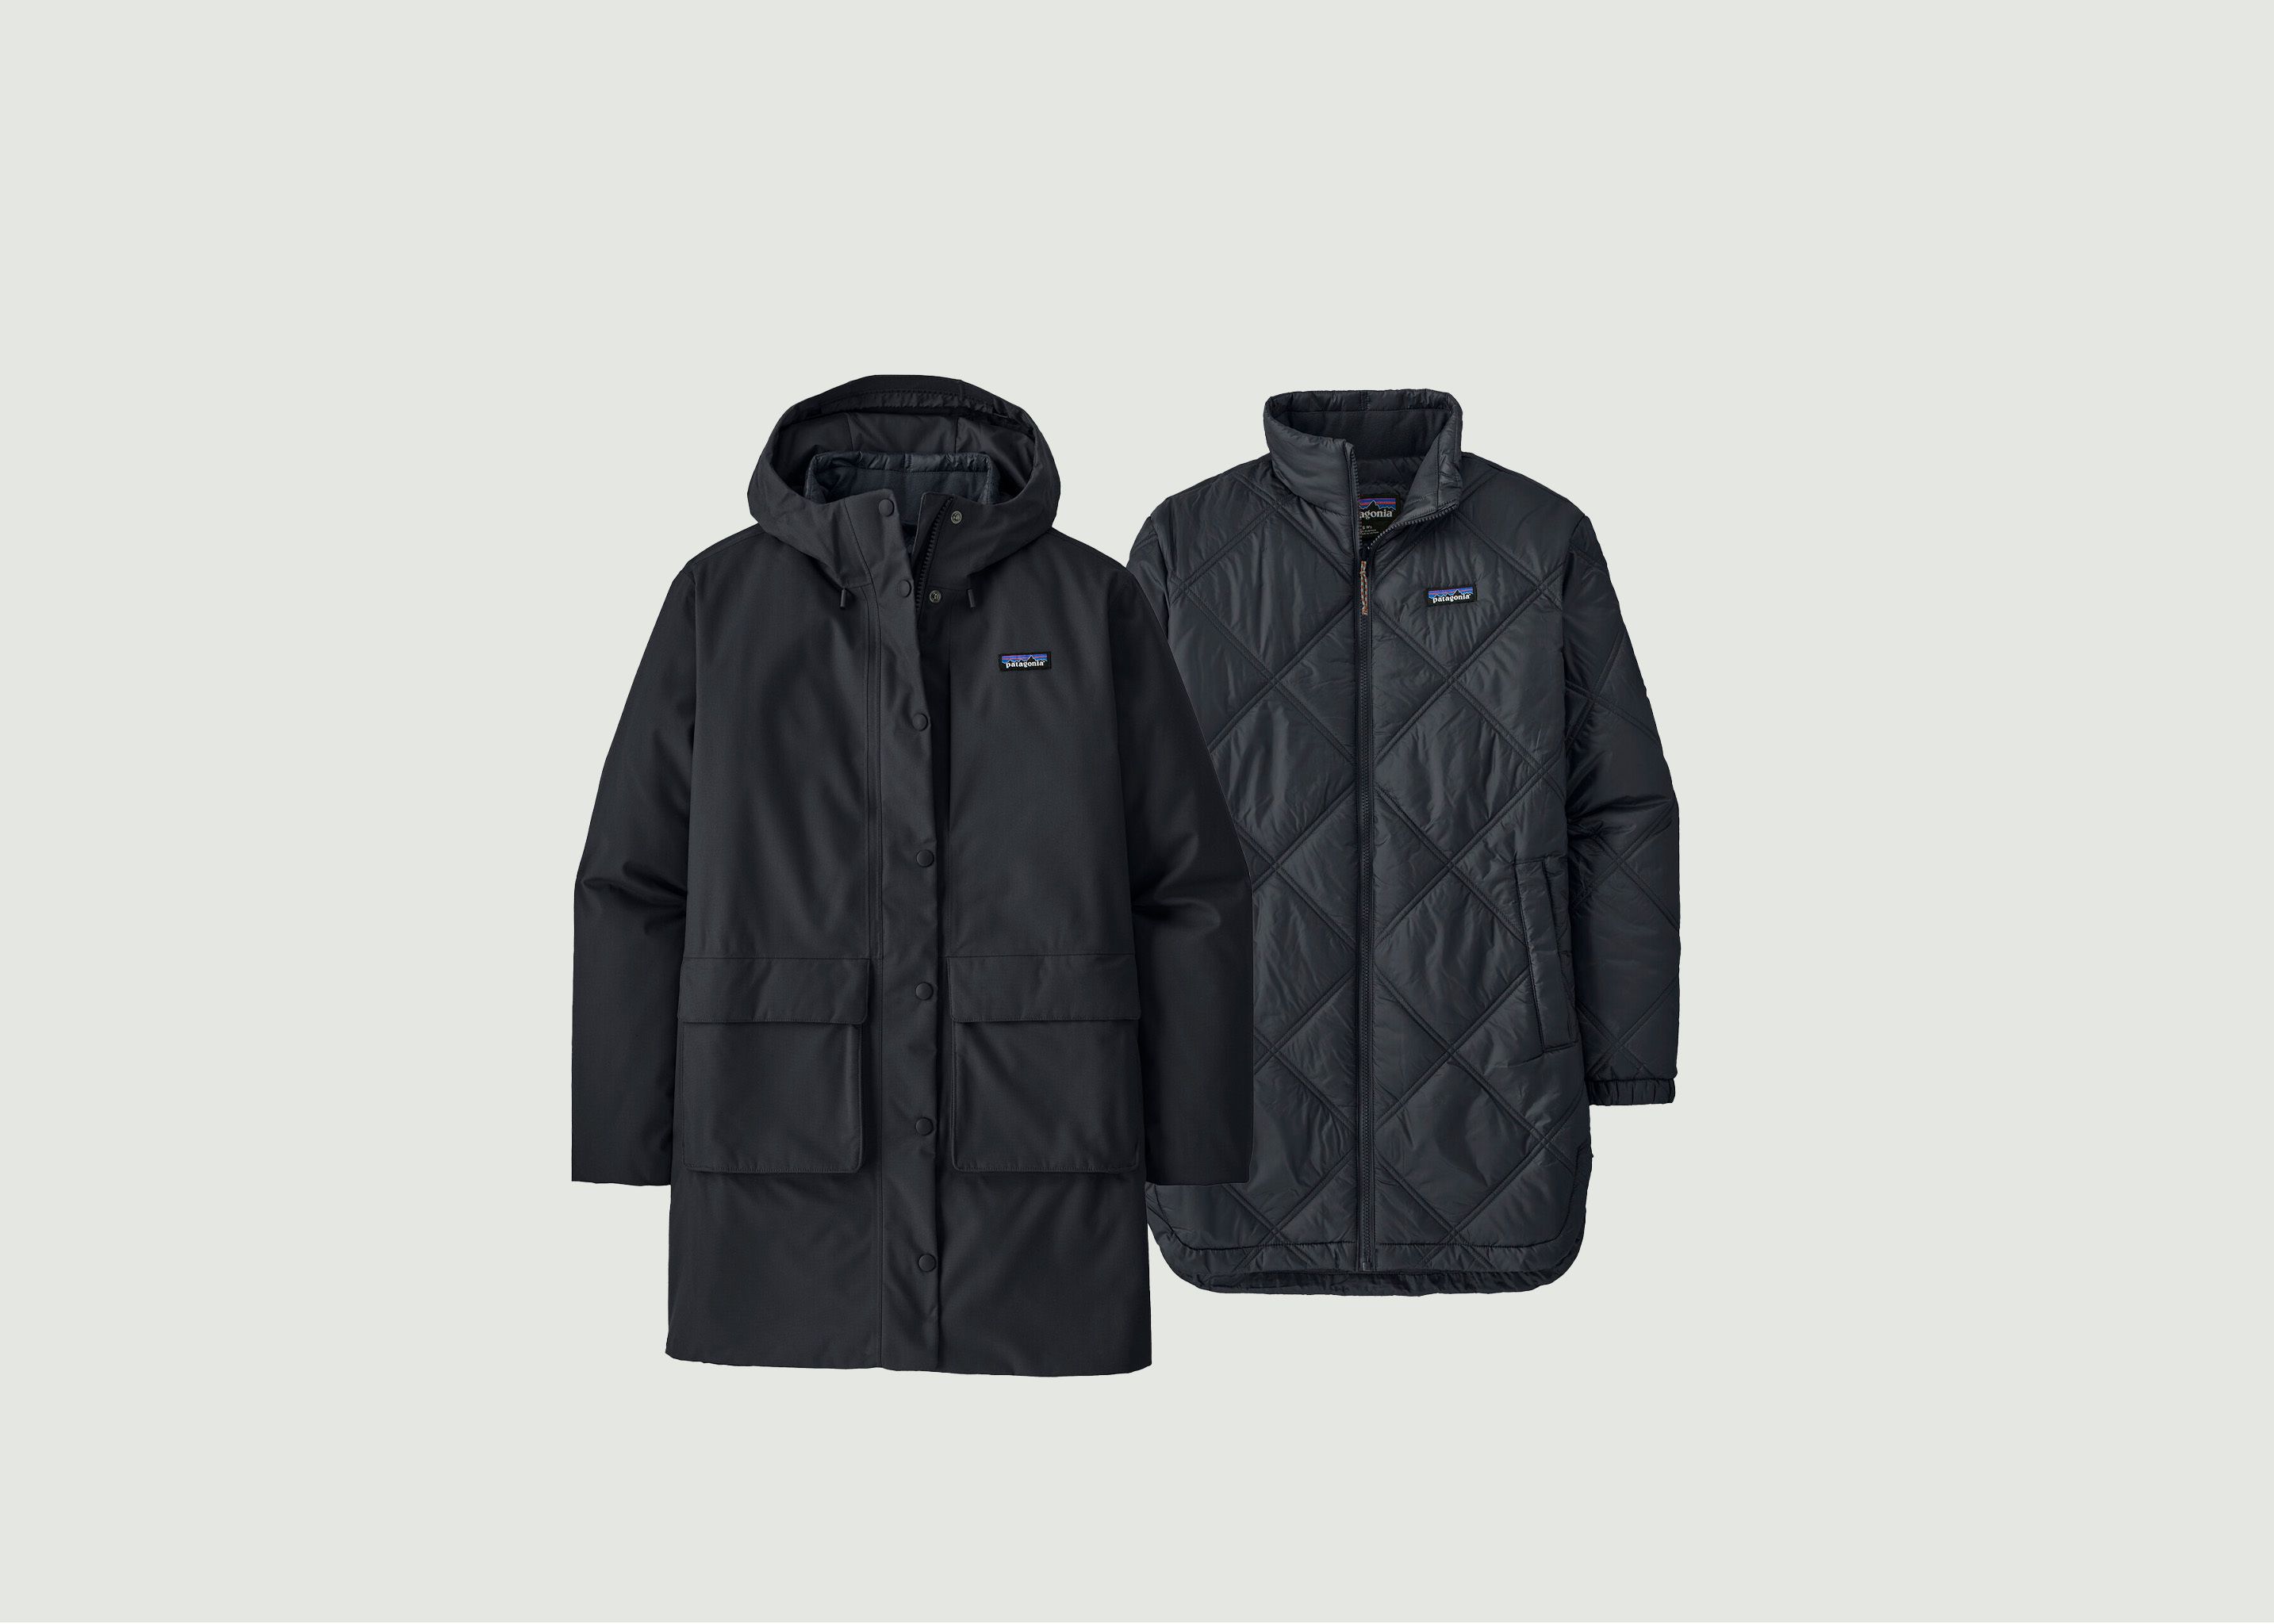 W\'s Pine Bank 3-in-1 parka   - Patagonia